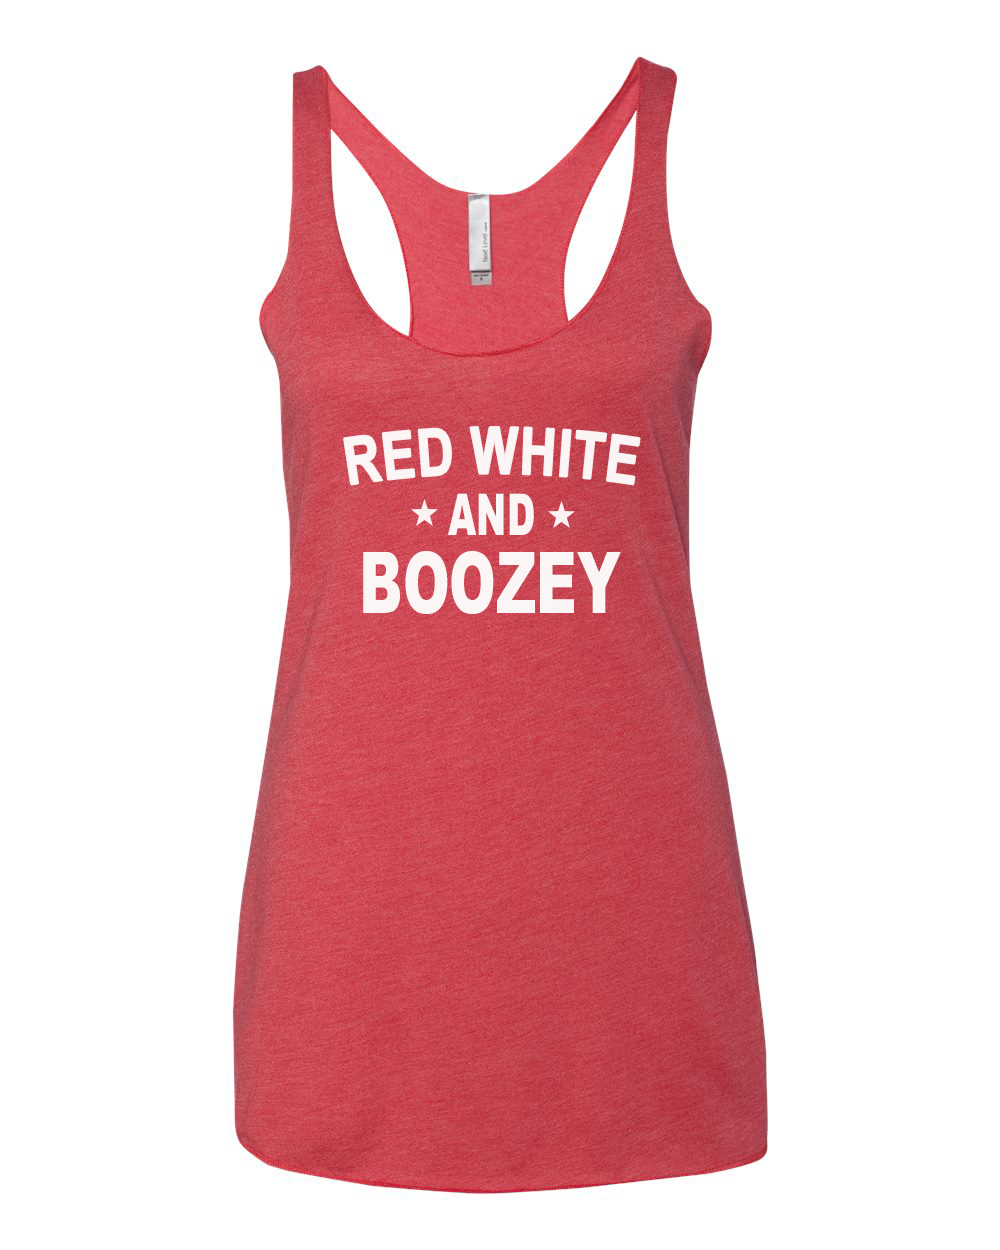 Red White and Boozey Tank Top - Vintage Red